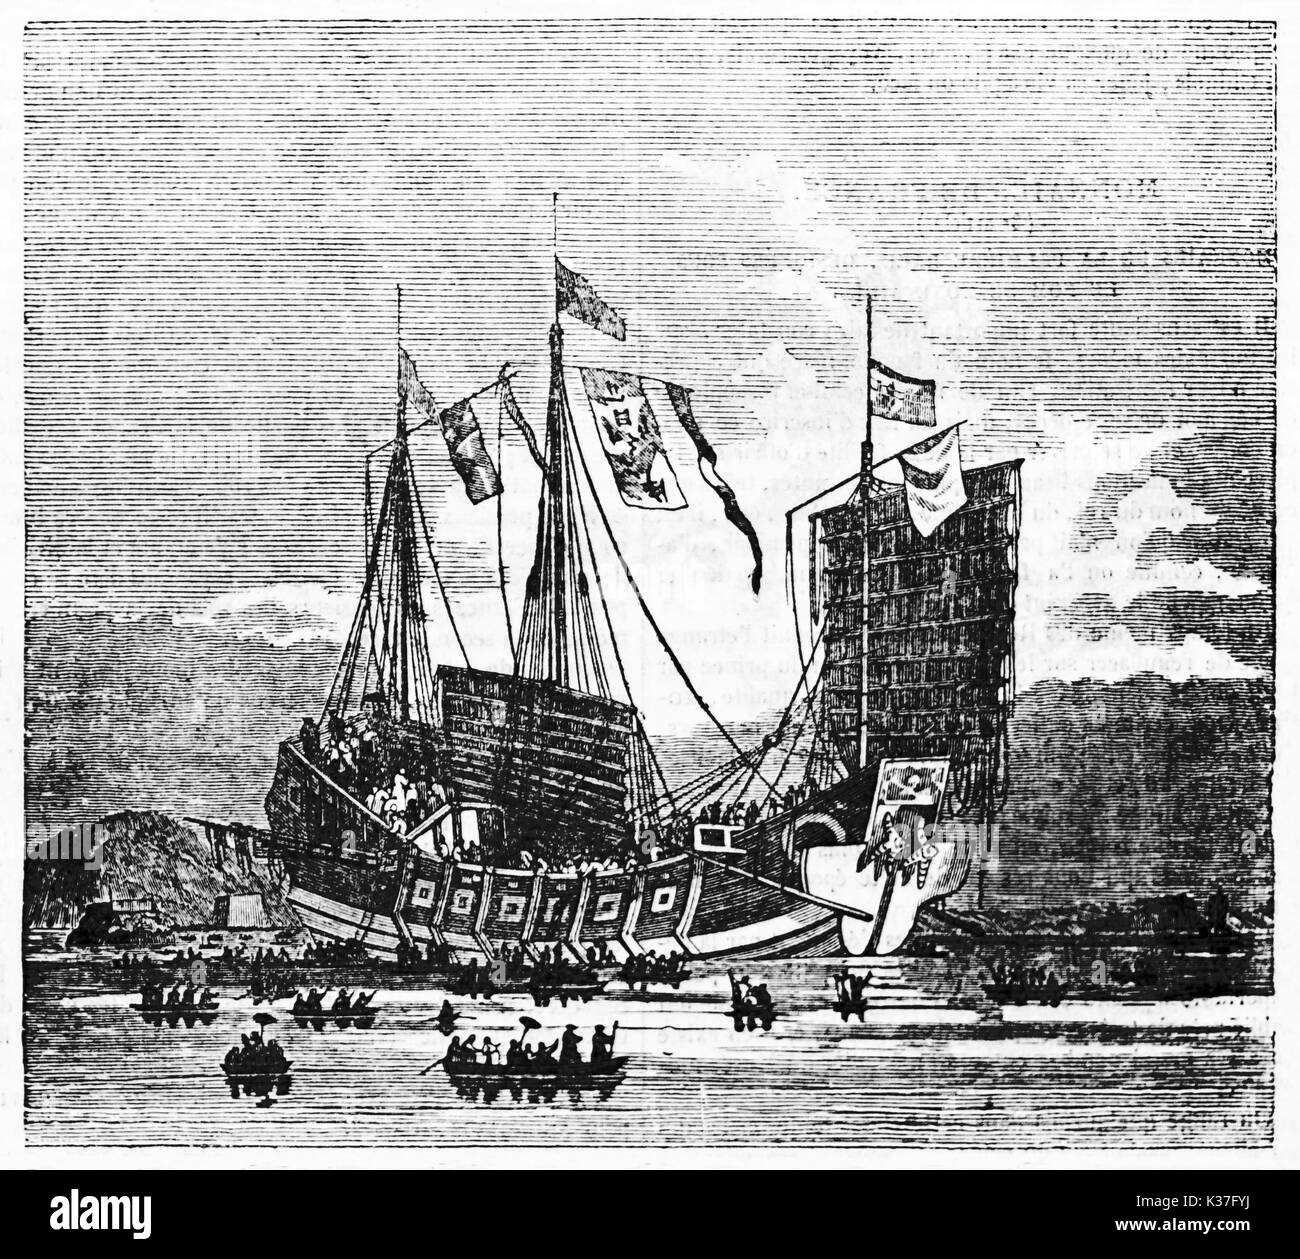 Ancient chinese vessel on the sea. Old Illustration by unidentified author published on Magasin Pittoresque Paris 1834 Stock Photo